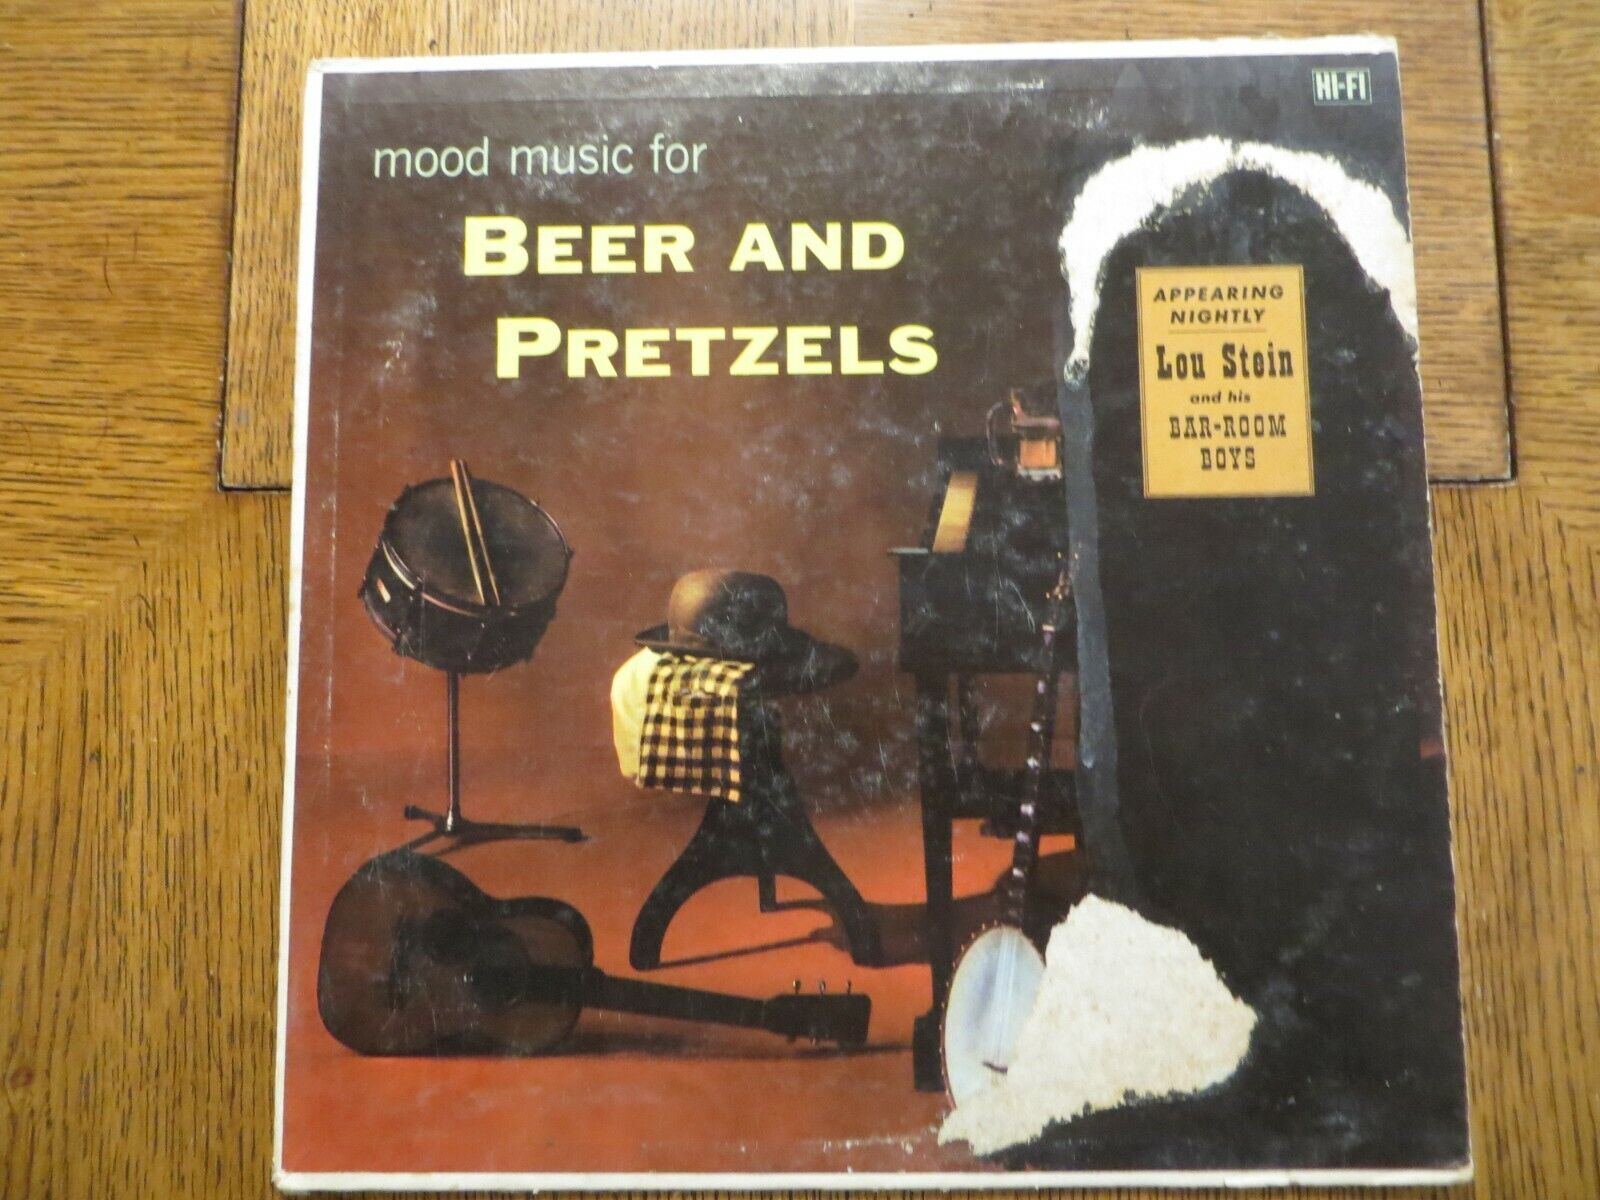 Lou Stein & His Bar-Room Boys – Mood Music For Beer And Pretzels - 1957 LP VG+/G